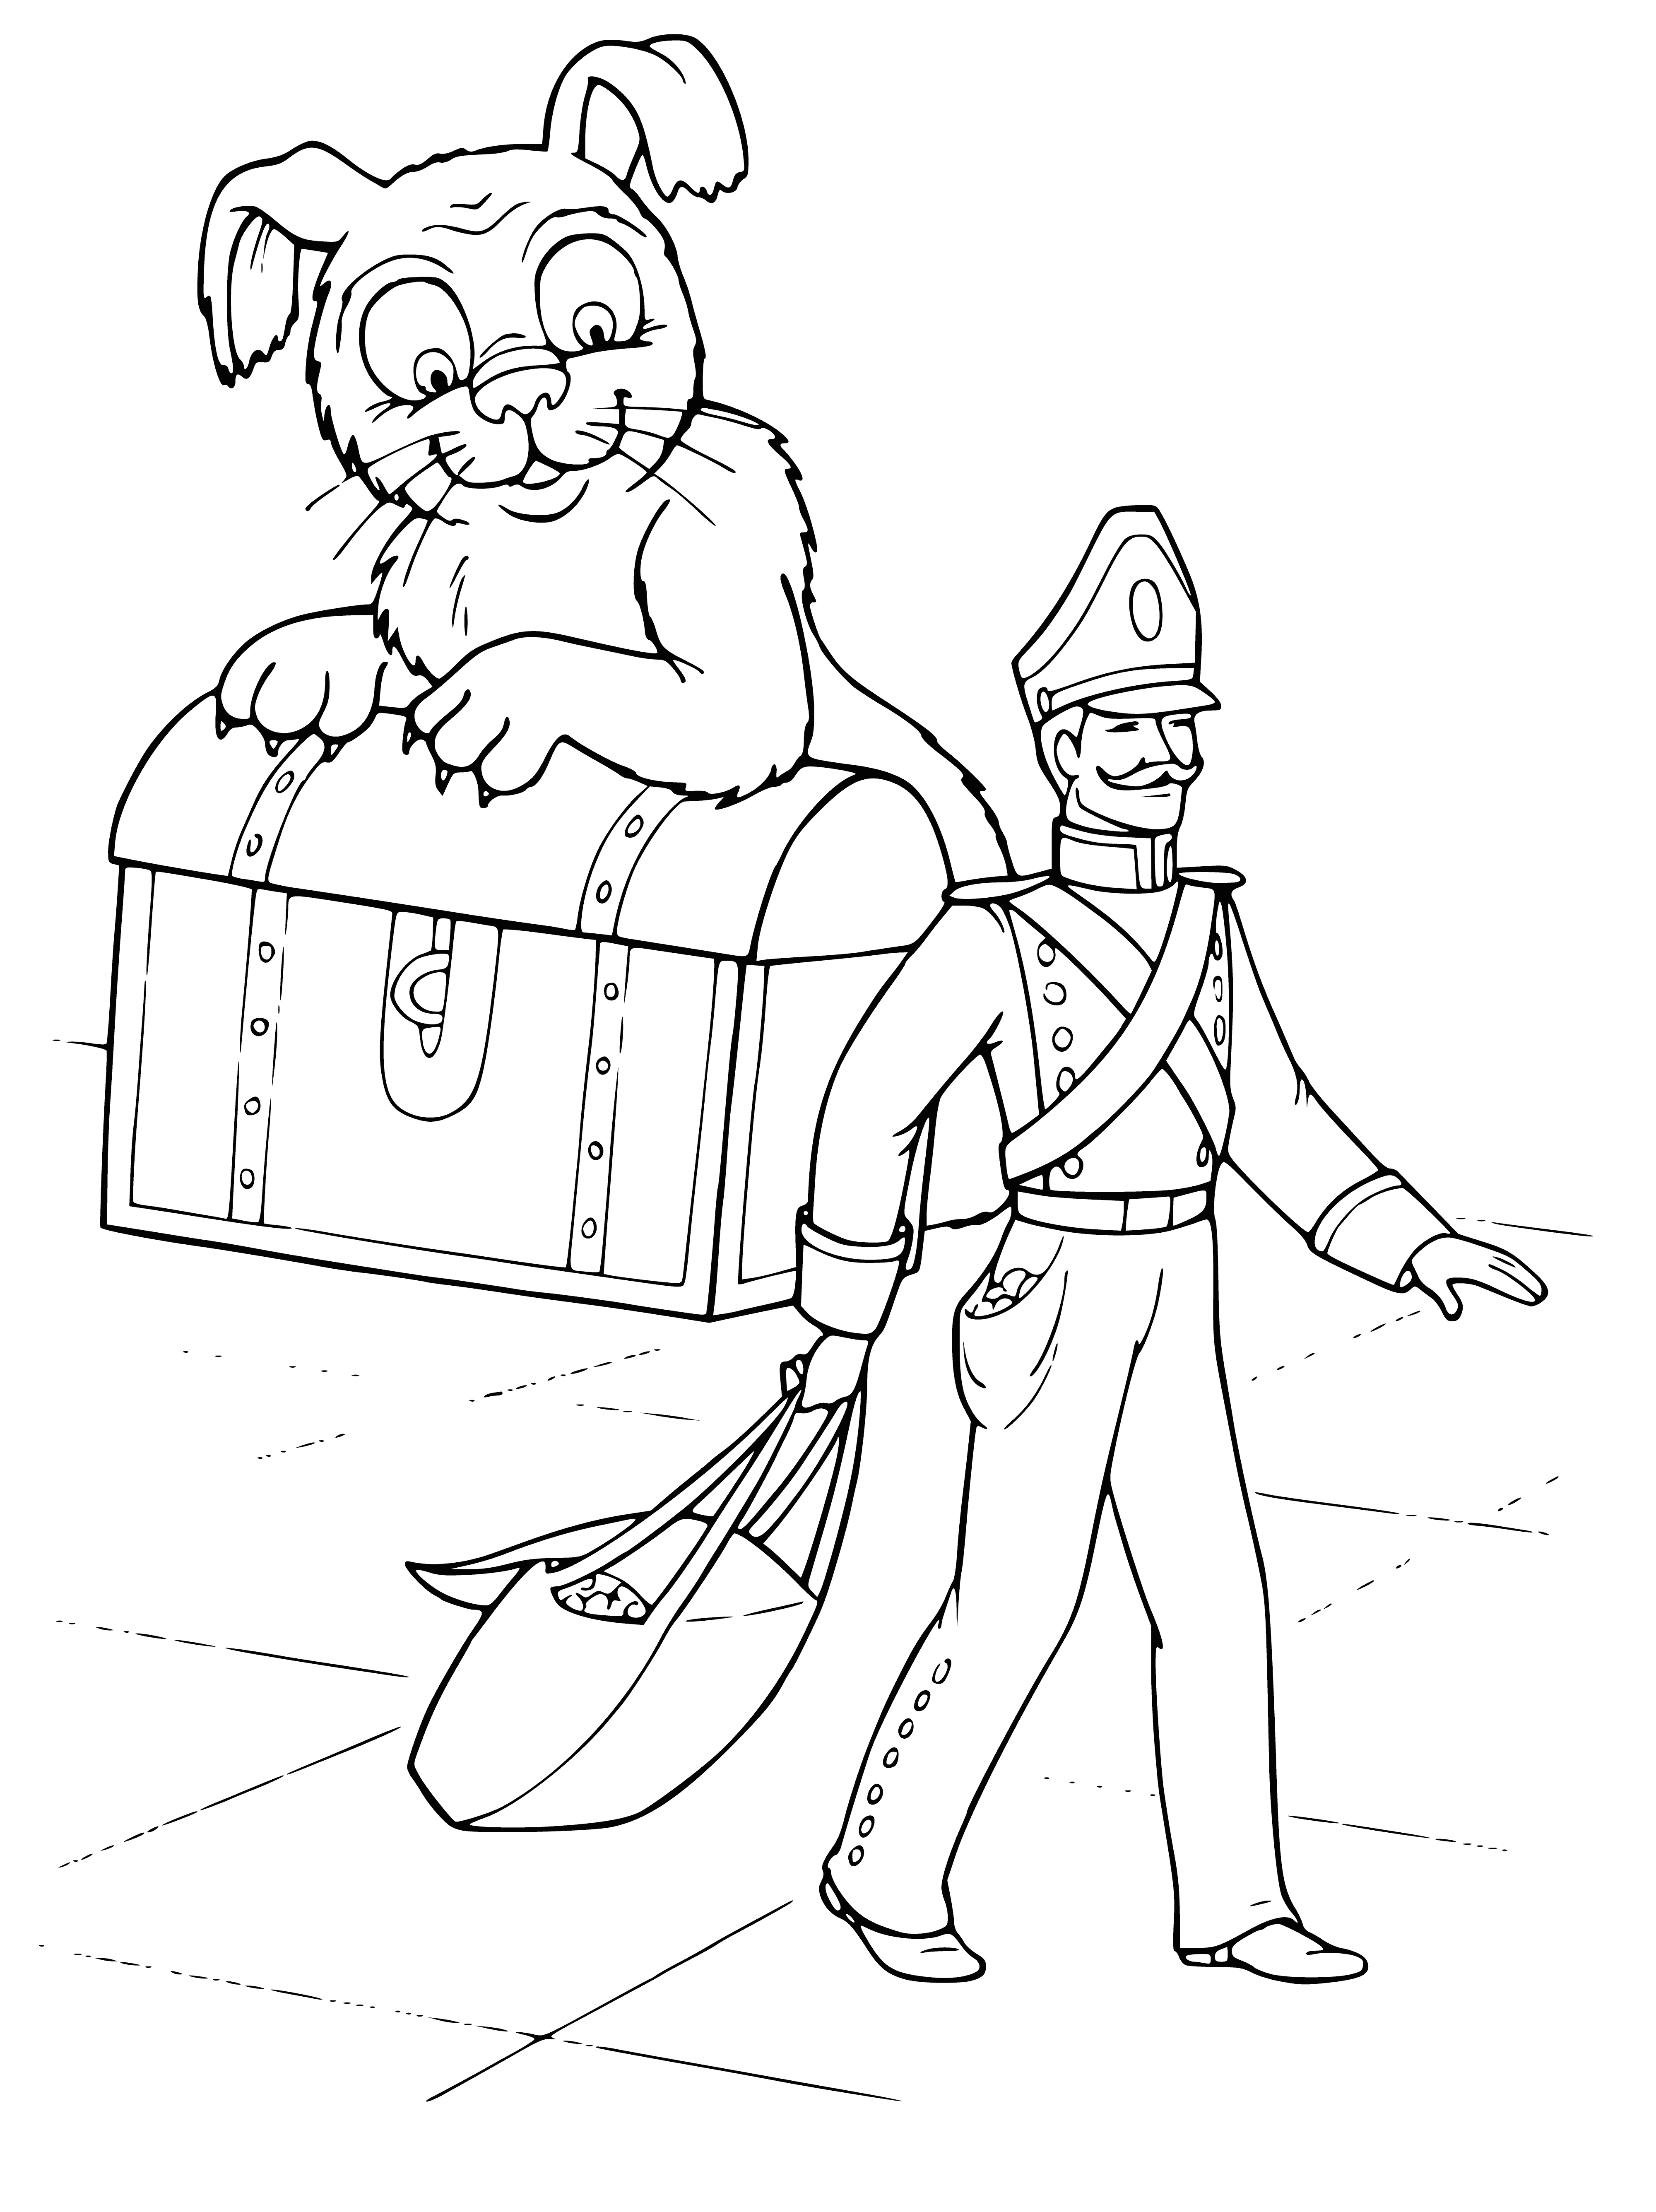 Soldier and dog coloring page